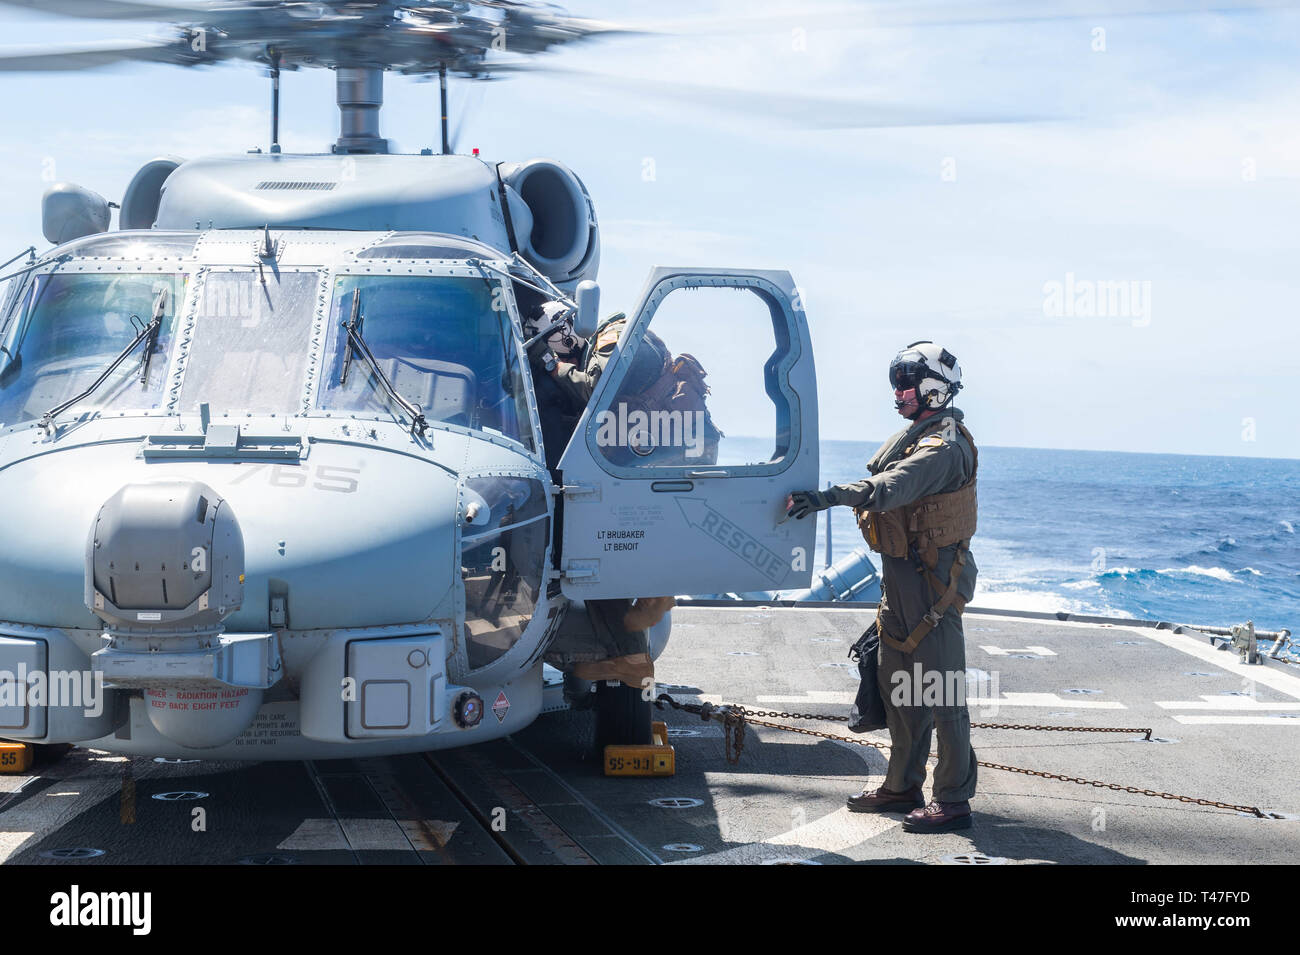 190410-N-DS74-0044 ATLANTIC OCEAN (April 10, 2019) A Pilot boards an MH-60R Sea Hawk helicopter assigned to the “Grandmasters” of Helicopter Maritime Strike Squadron (HSM) 46 aboard the Ticonderoga-class guided-missile cruiser USS Leyte Gulf (CG 55) during flight operations. Leyte Gulf is underway as part of the Abraham Lincoln Carrier Strike Group (ABECSG) deployment in support of maritime security cooperation efforts in the U.S. 5th, 6th and 7th Fleet areas of responsibility. With Abraham Lincoln as the flagship, deployed strike group assets include staffs, ships and aircraft of Carrier Stri Stock Photo